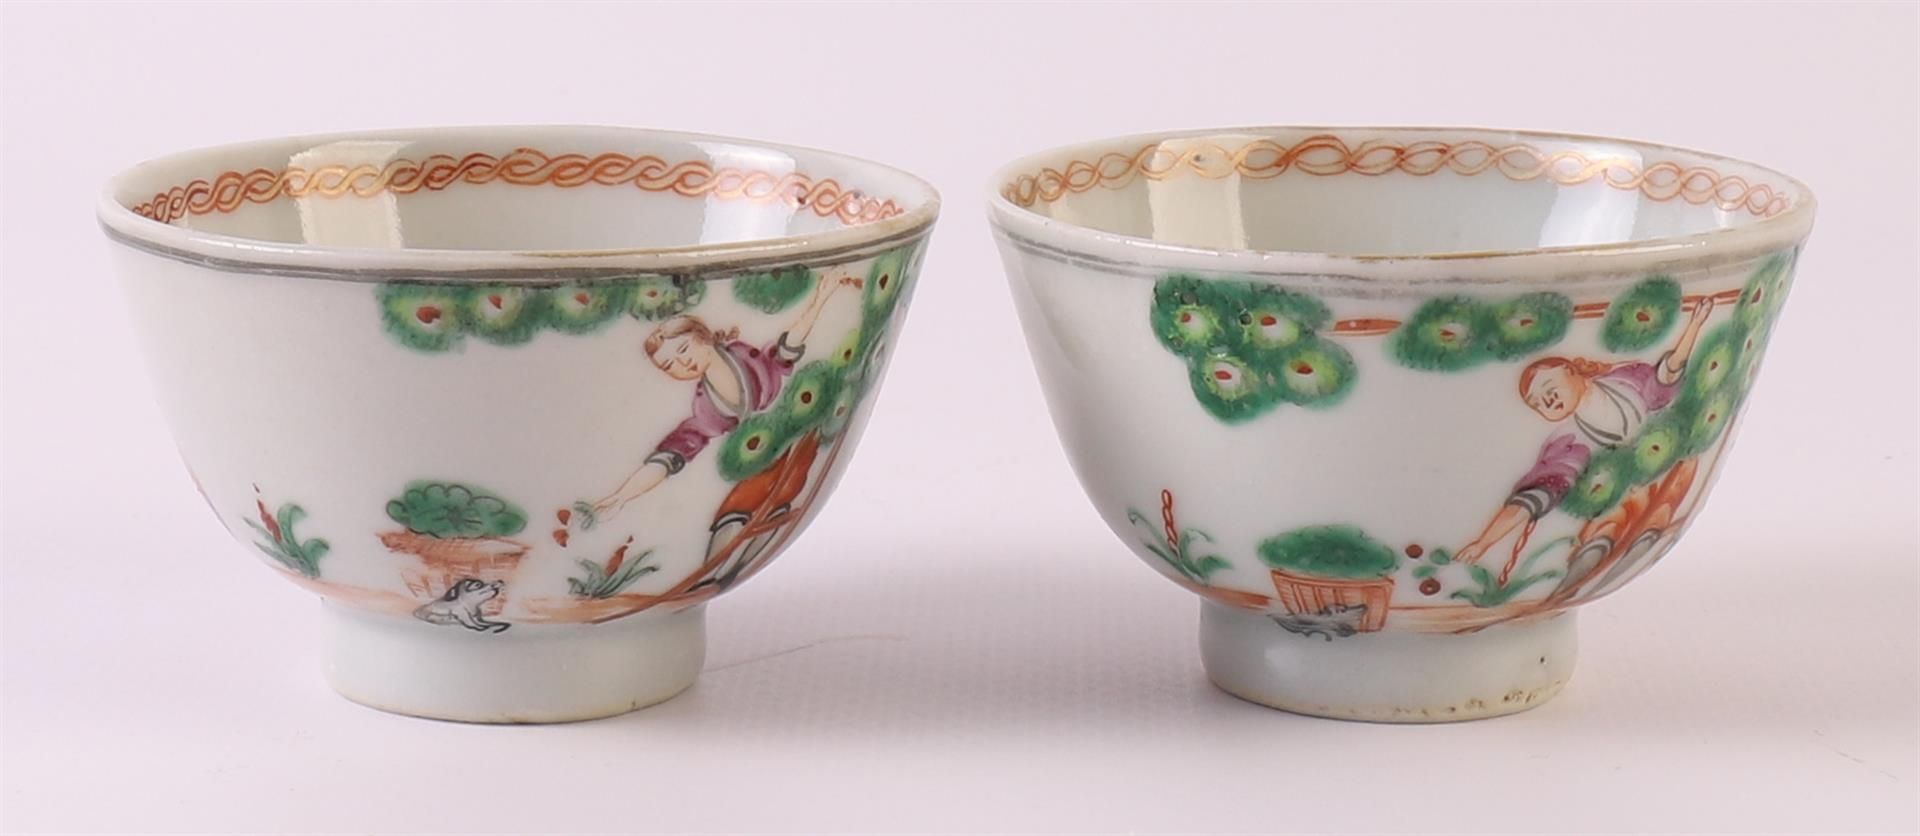 Four porcelain cups and accompanying saucers, Chine de Commande, China, Qianlong, 18th century. - Image 14 of 22